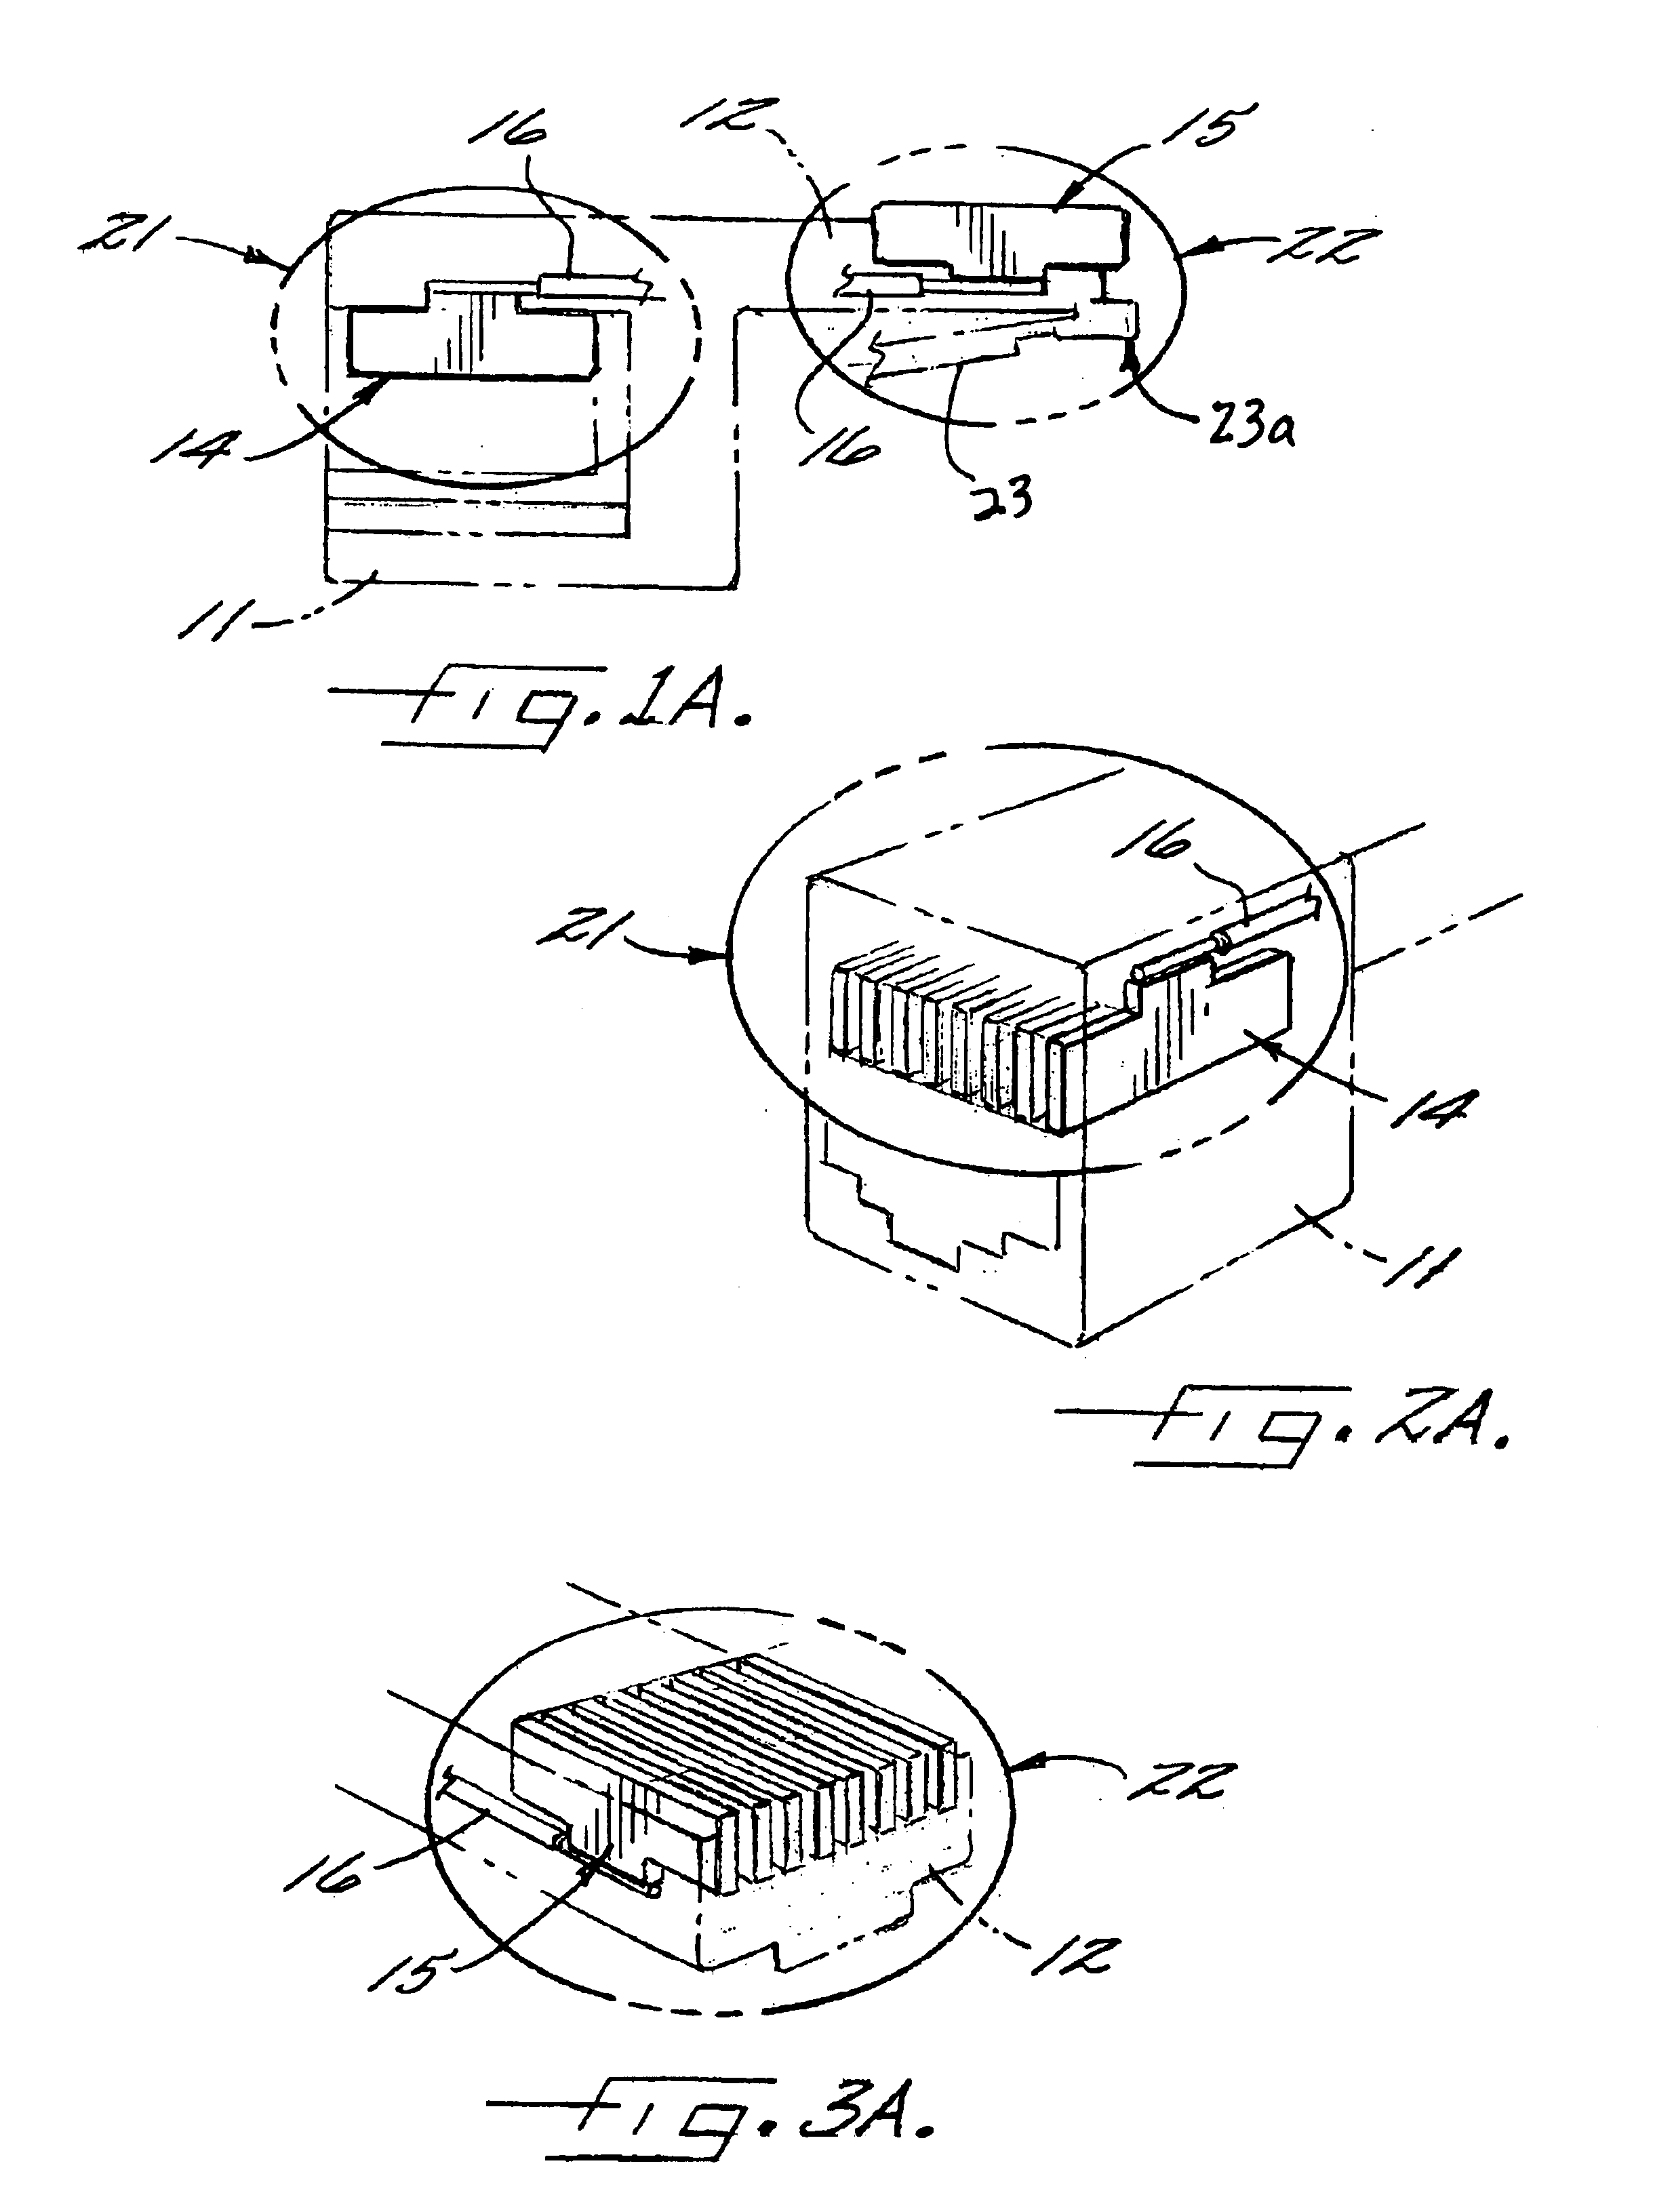 Cross-connector for interfacing multiple communication devices